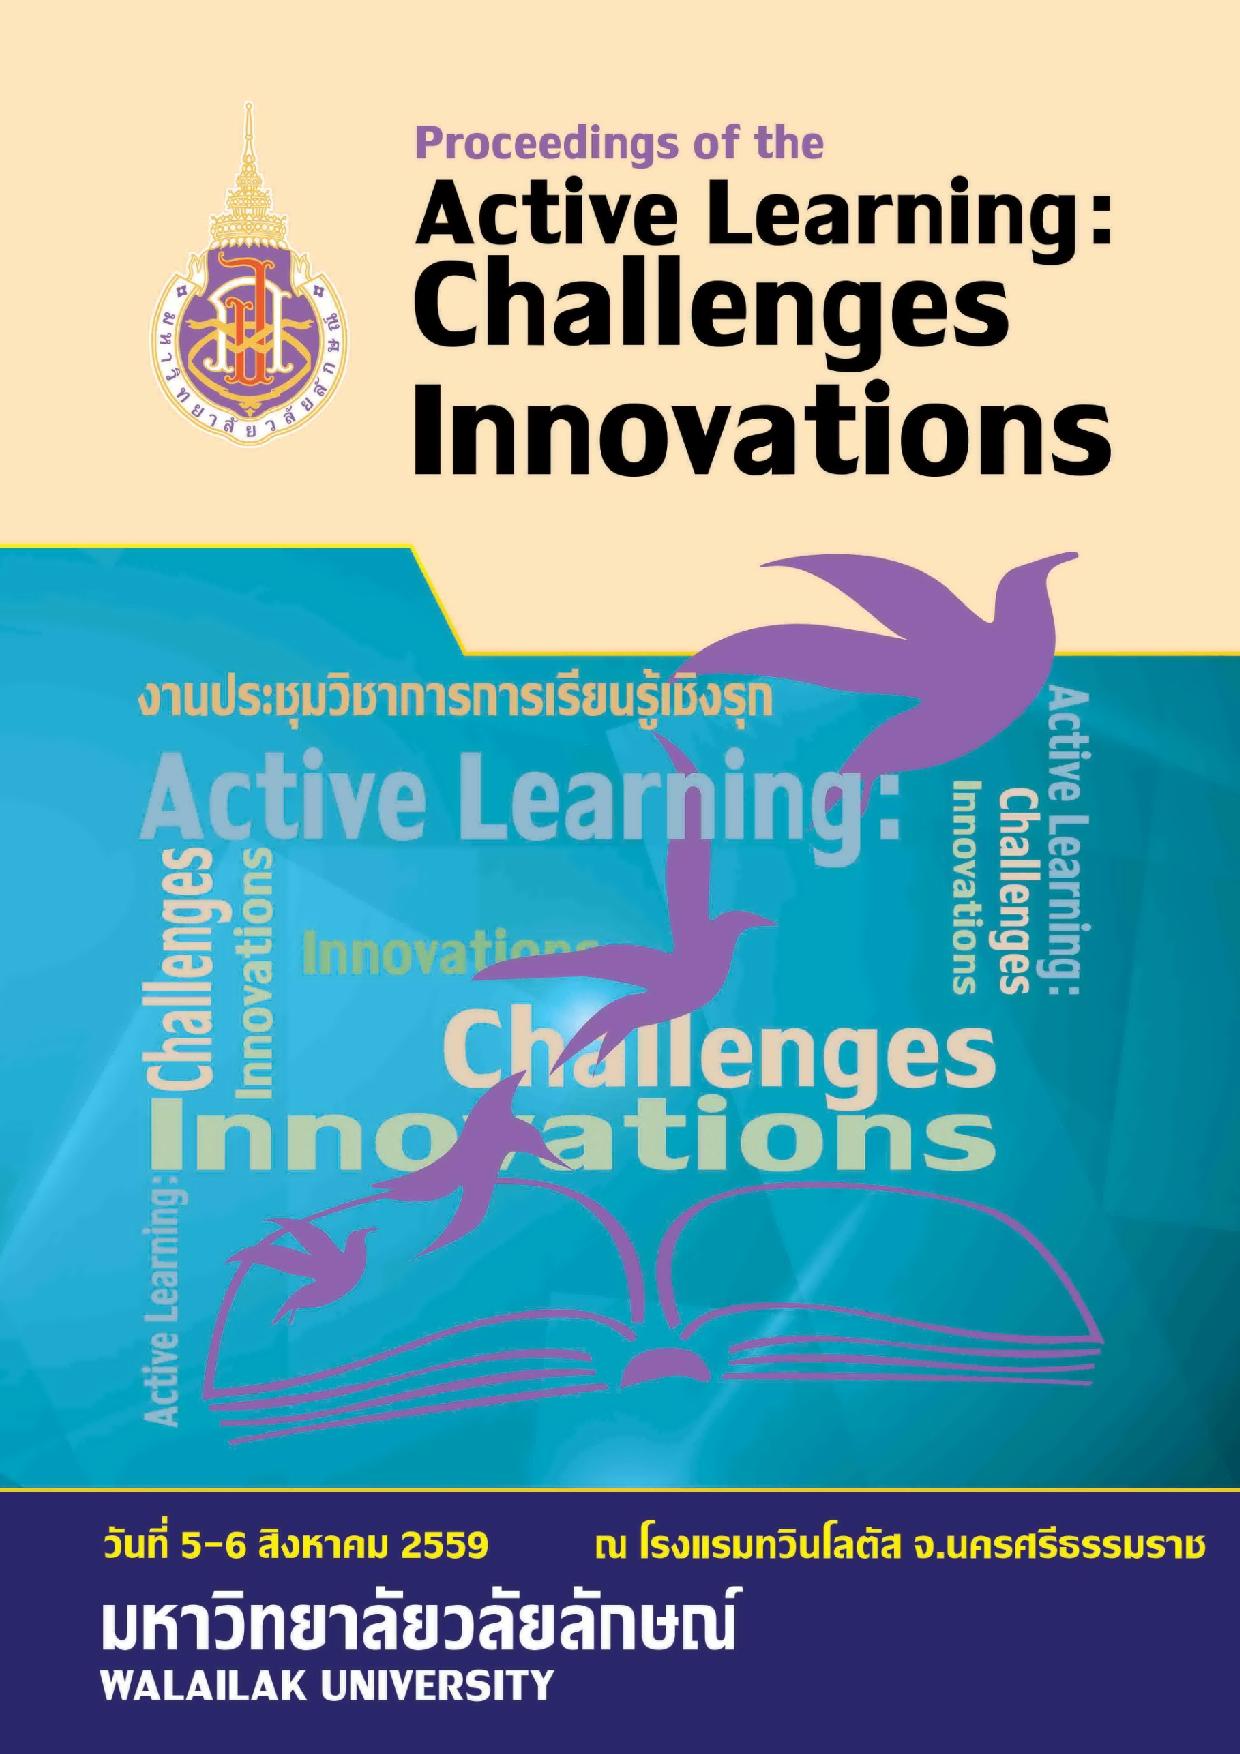 Proceedings of the Active Learning: Chalenges Innovation 